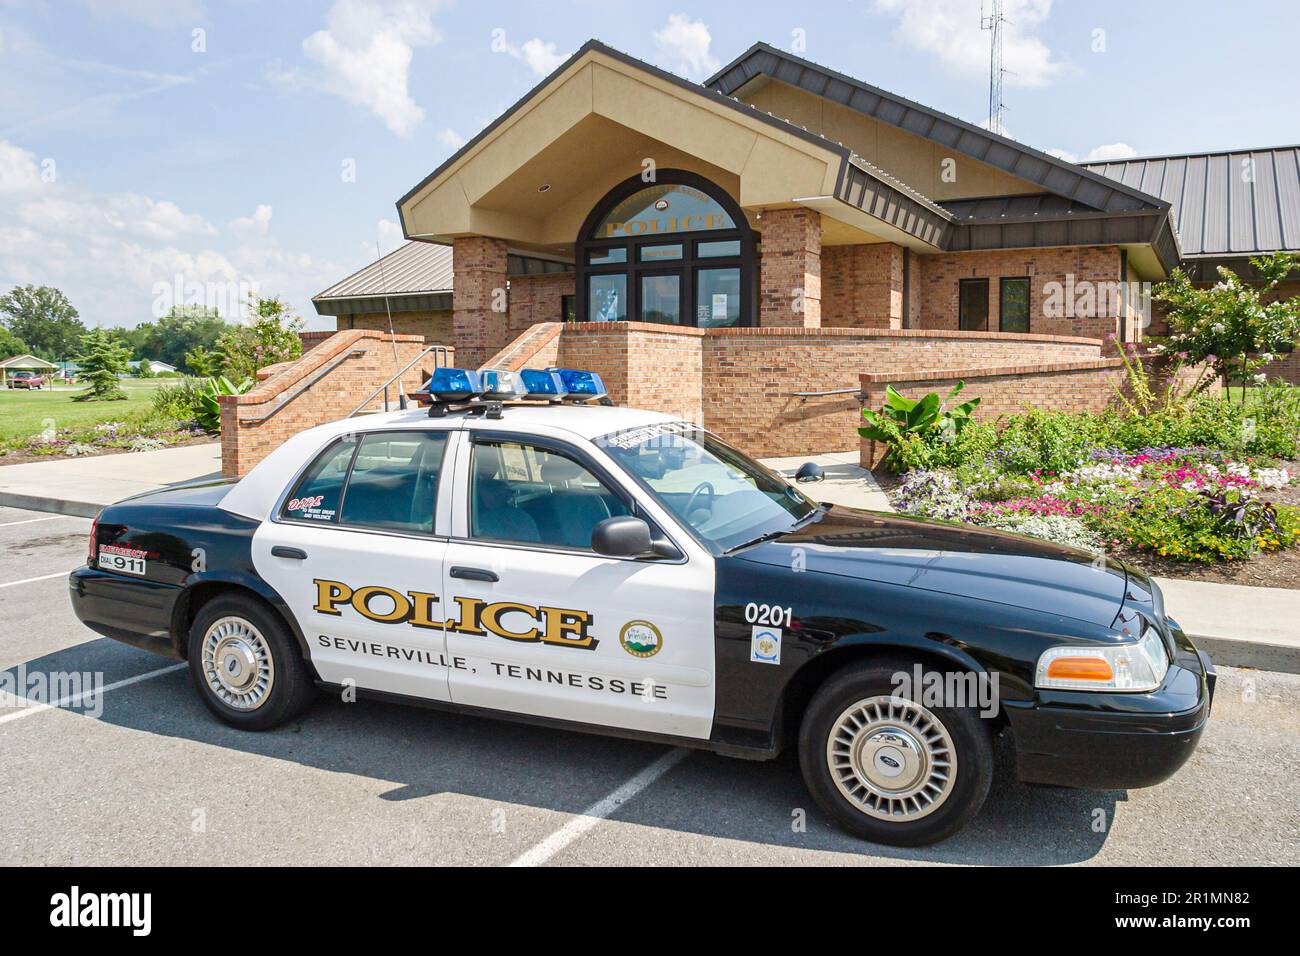 Sevierville Tennessee,Police Department law enforcement,car vehicle Stock Photo